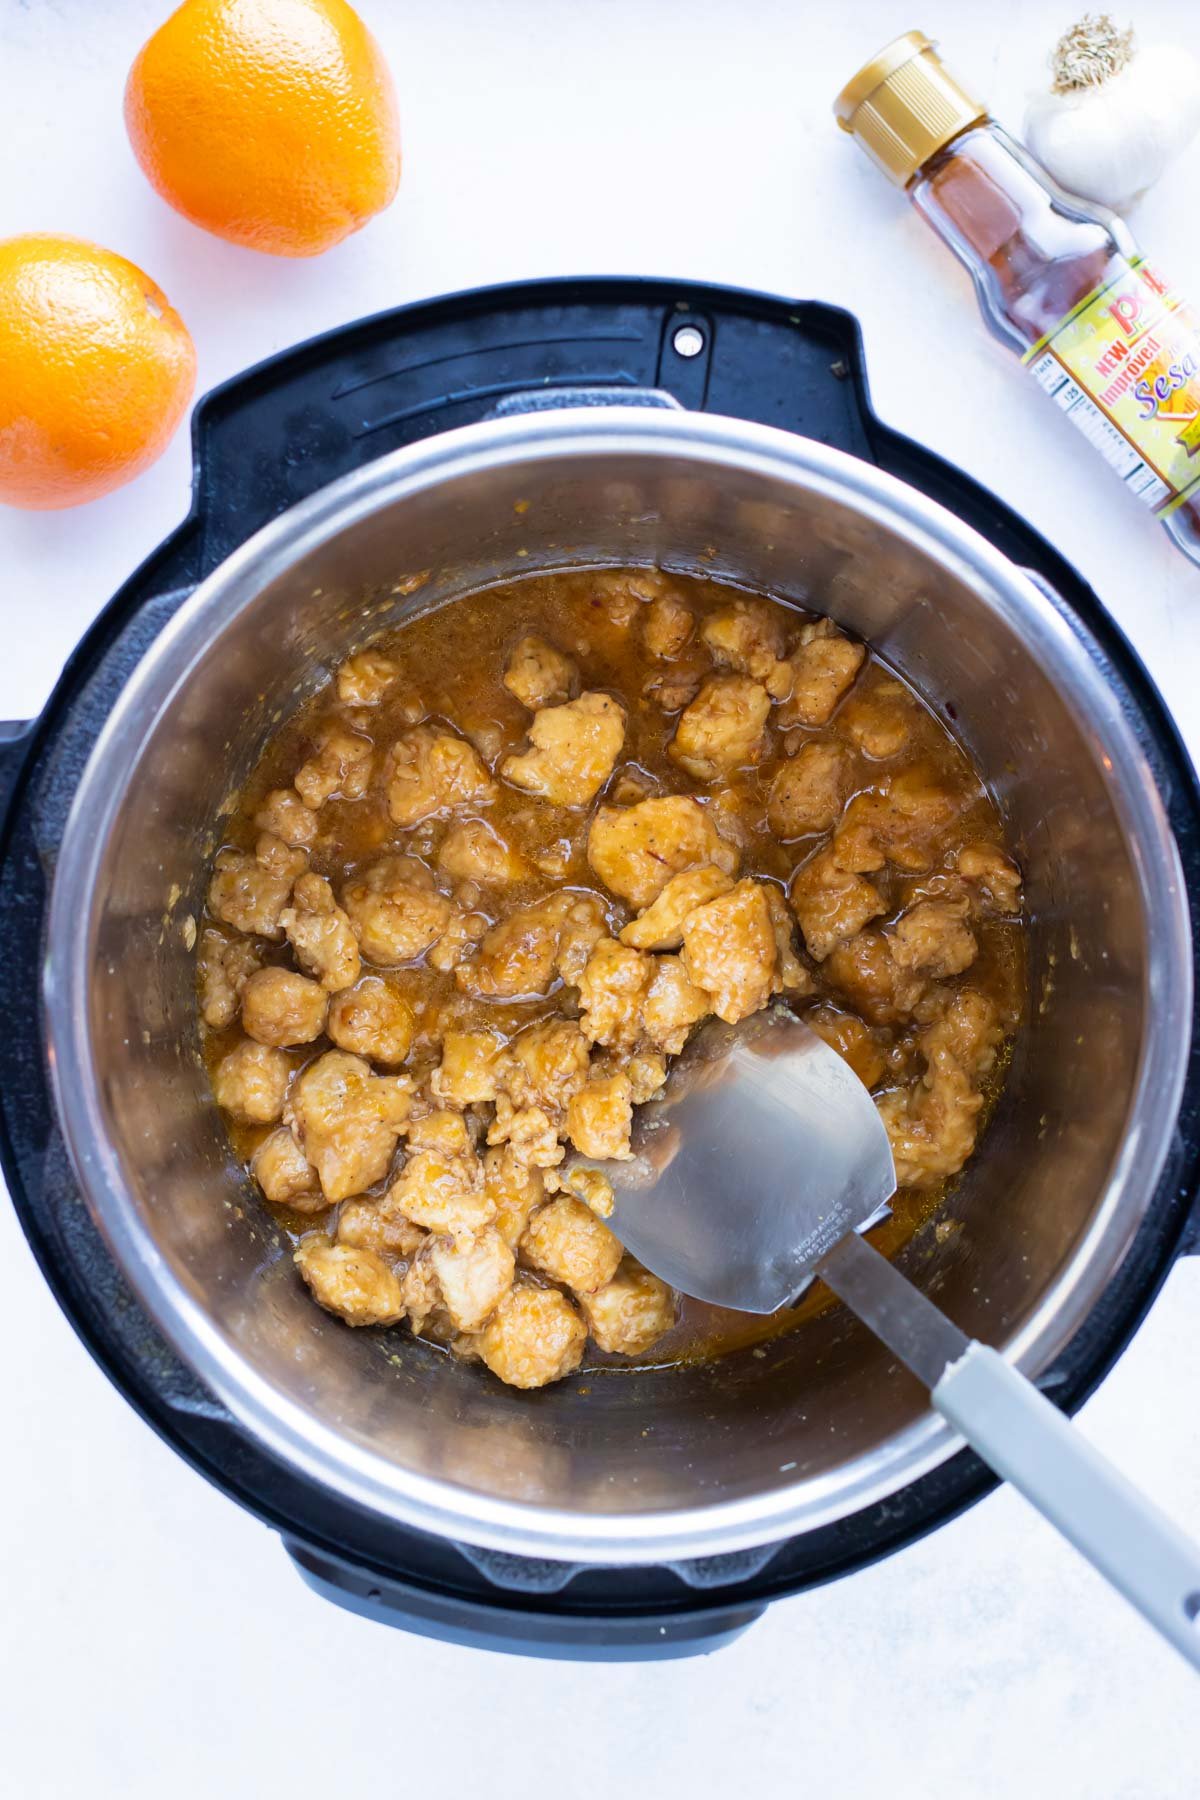 Chicken and sauces are stirred in an Instant Pot before cooking.